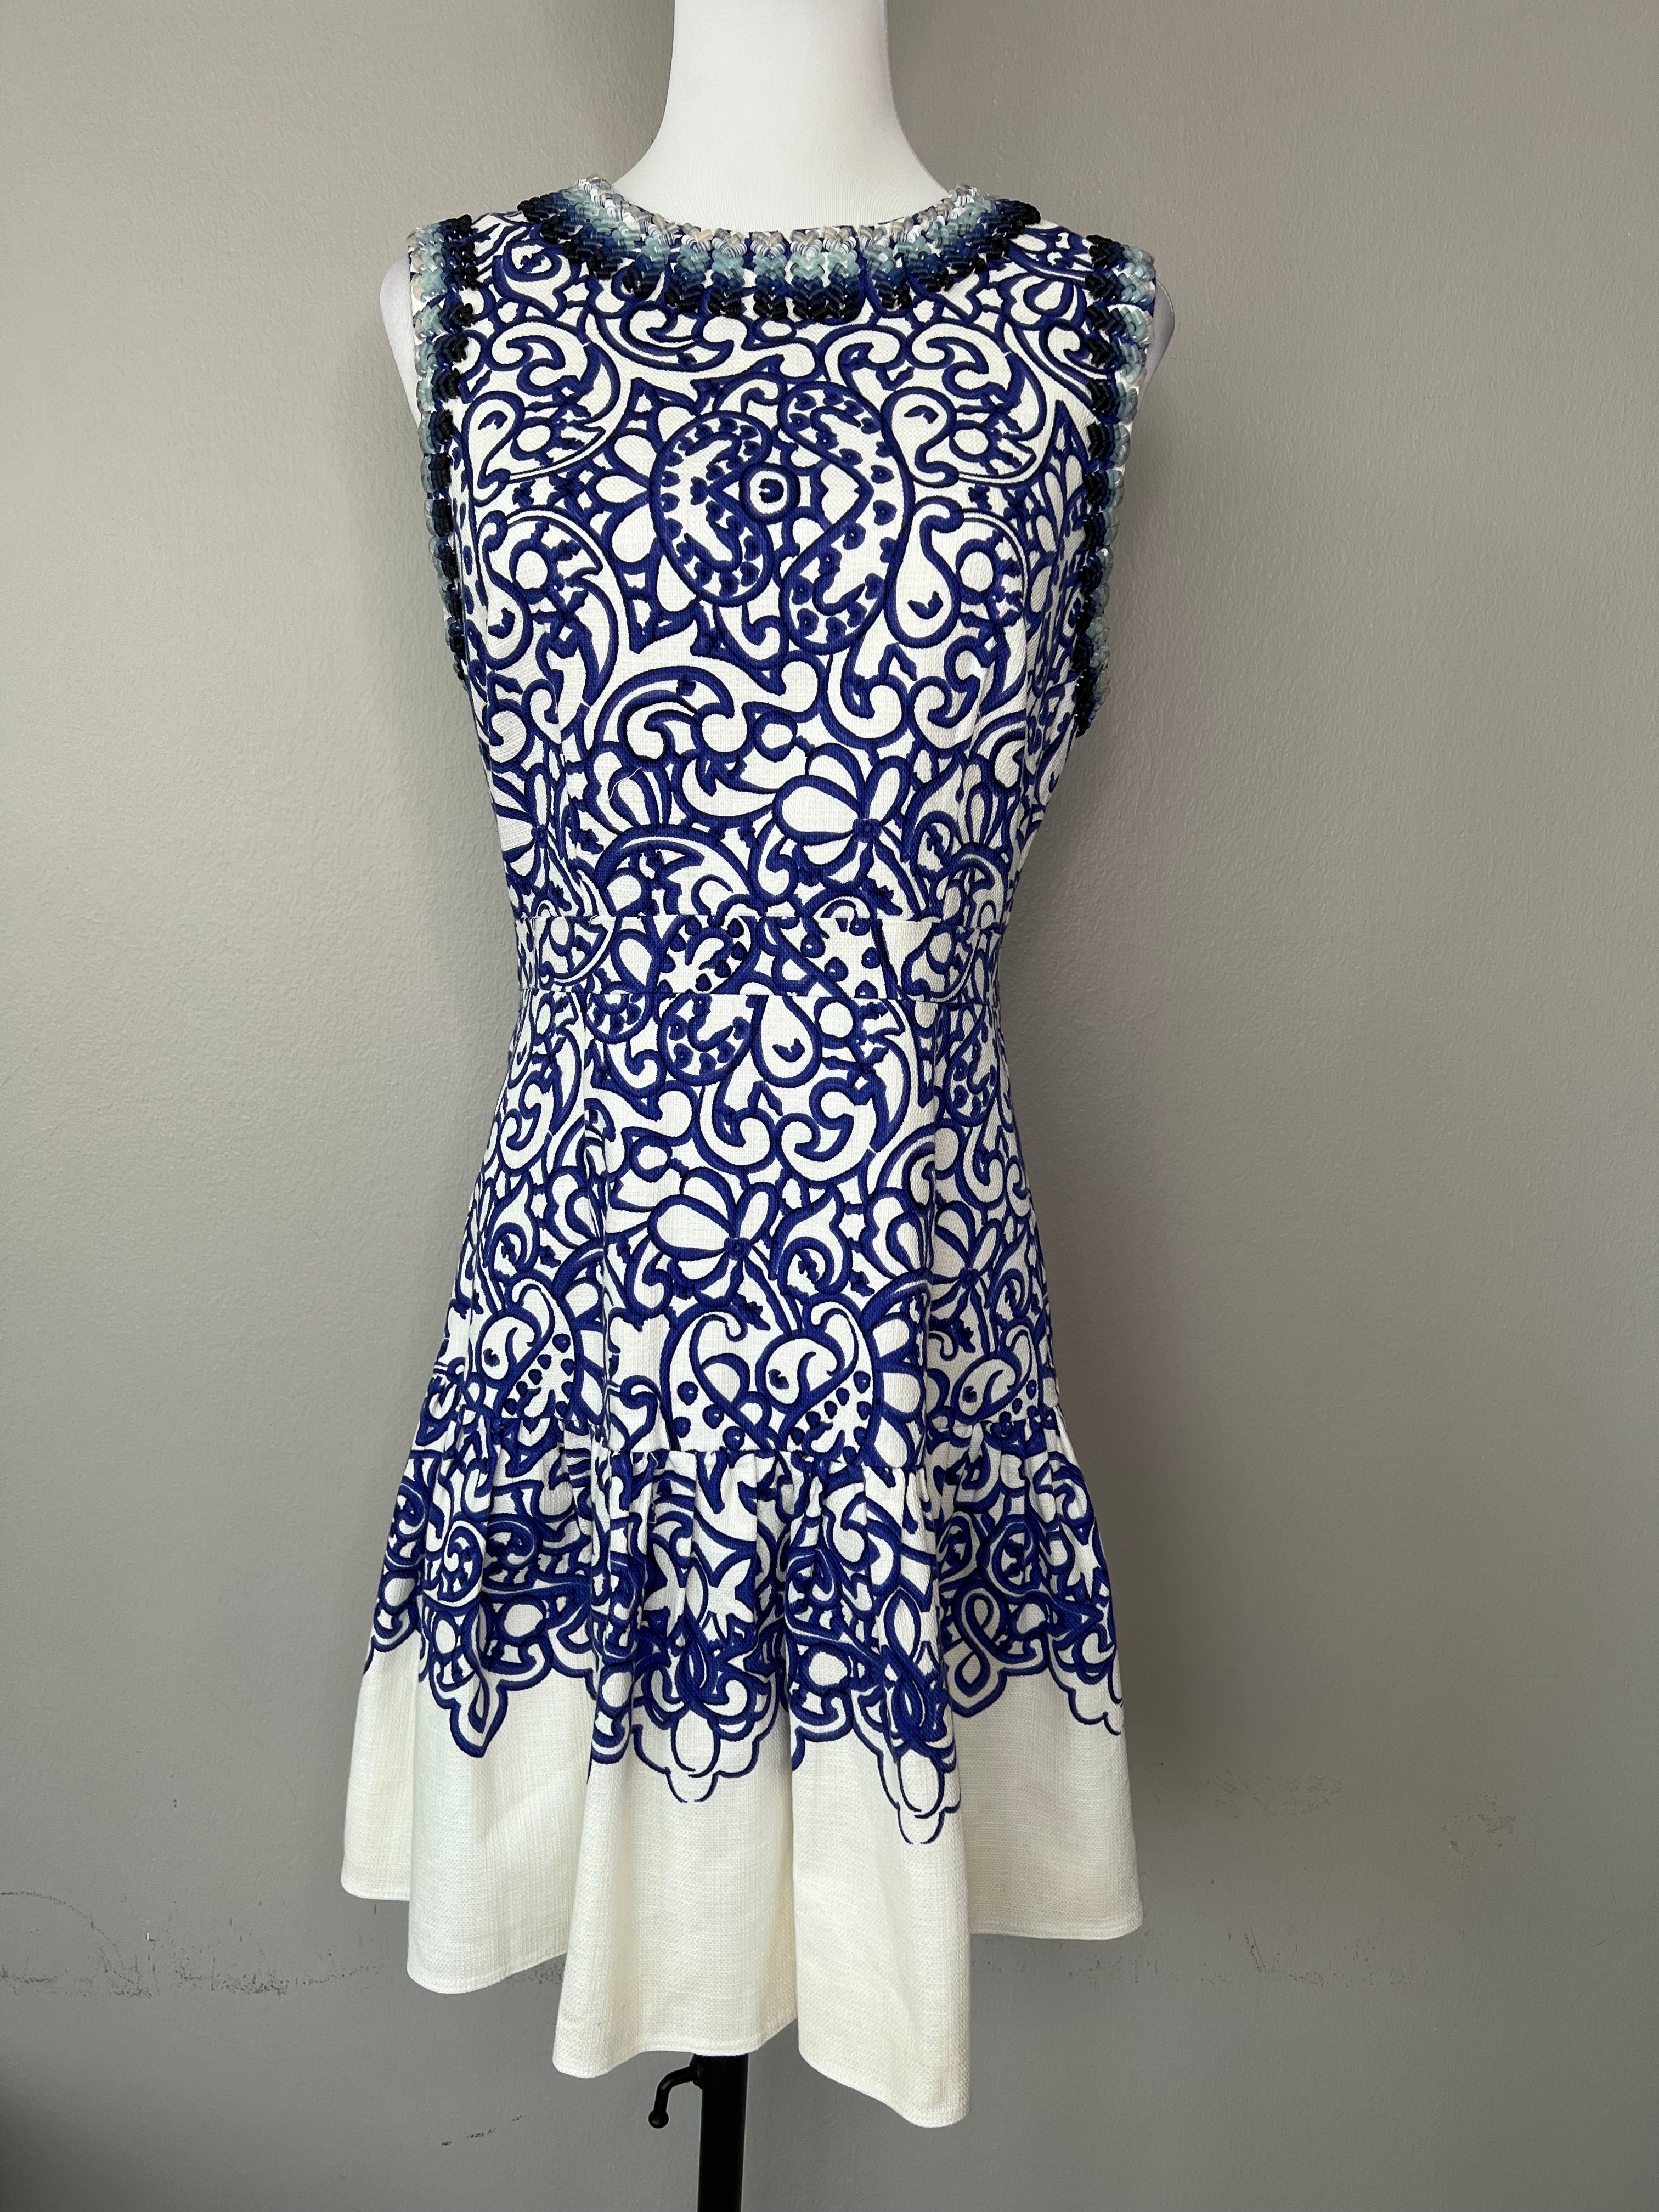 Royal blue and white ruffled dress with beaded details - MANOUSH